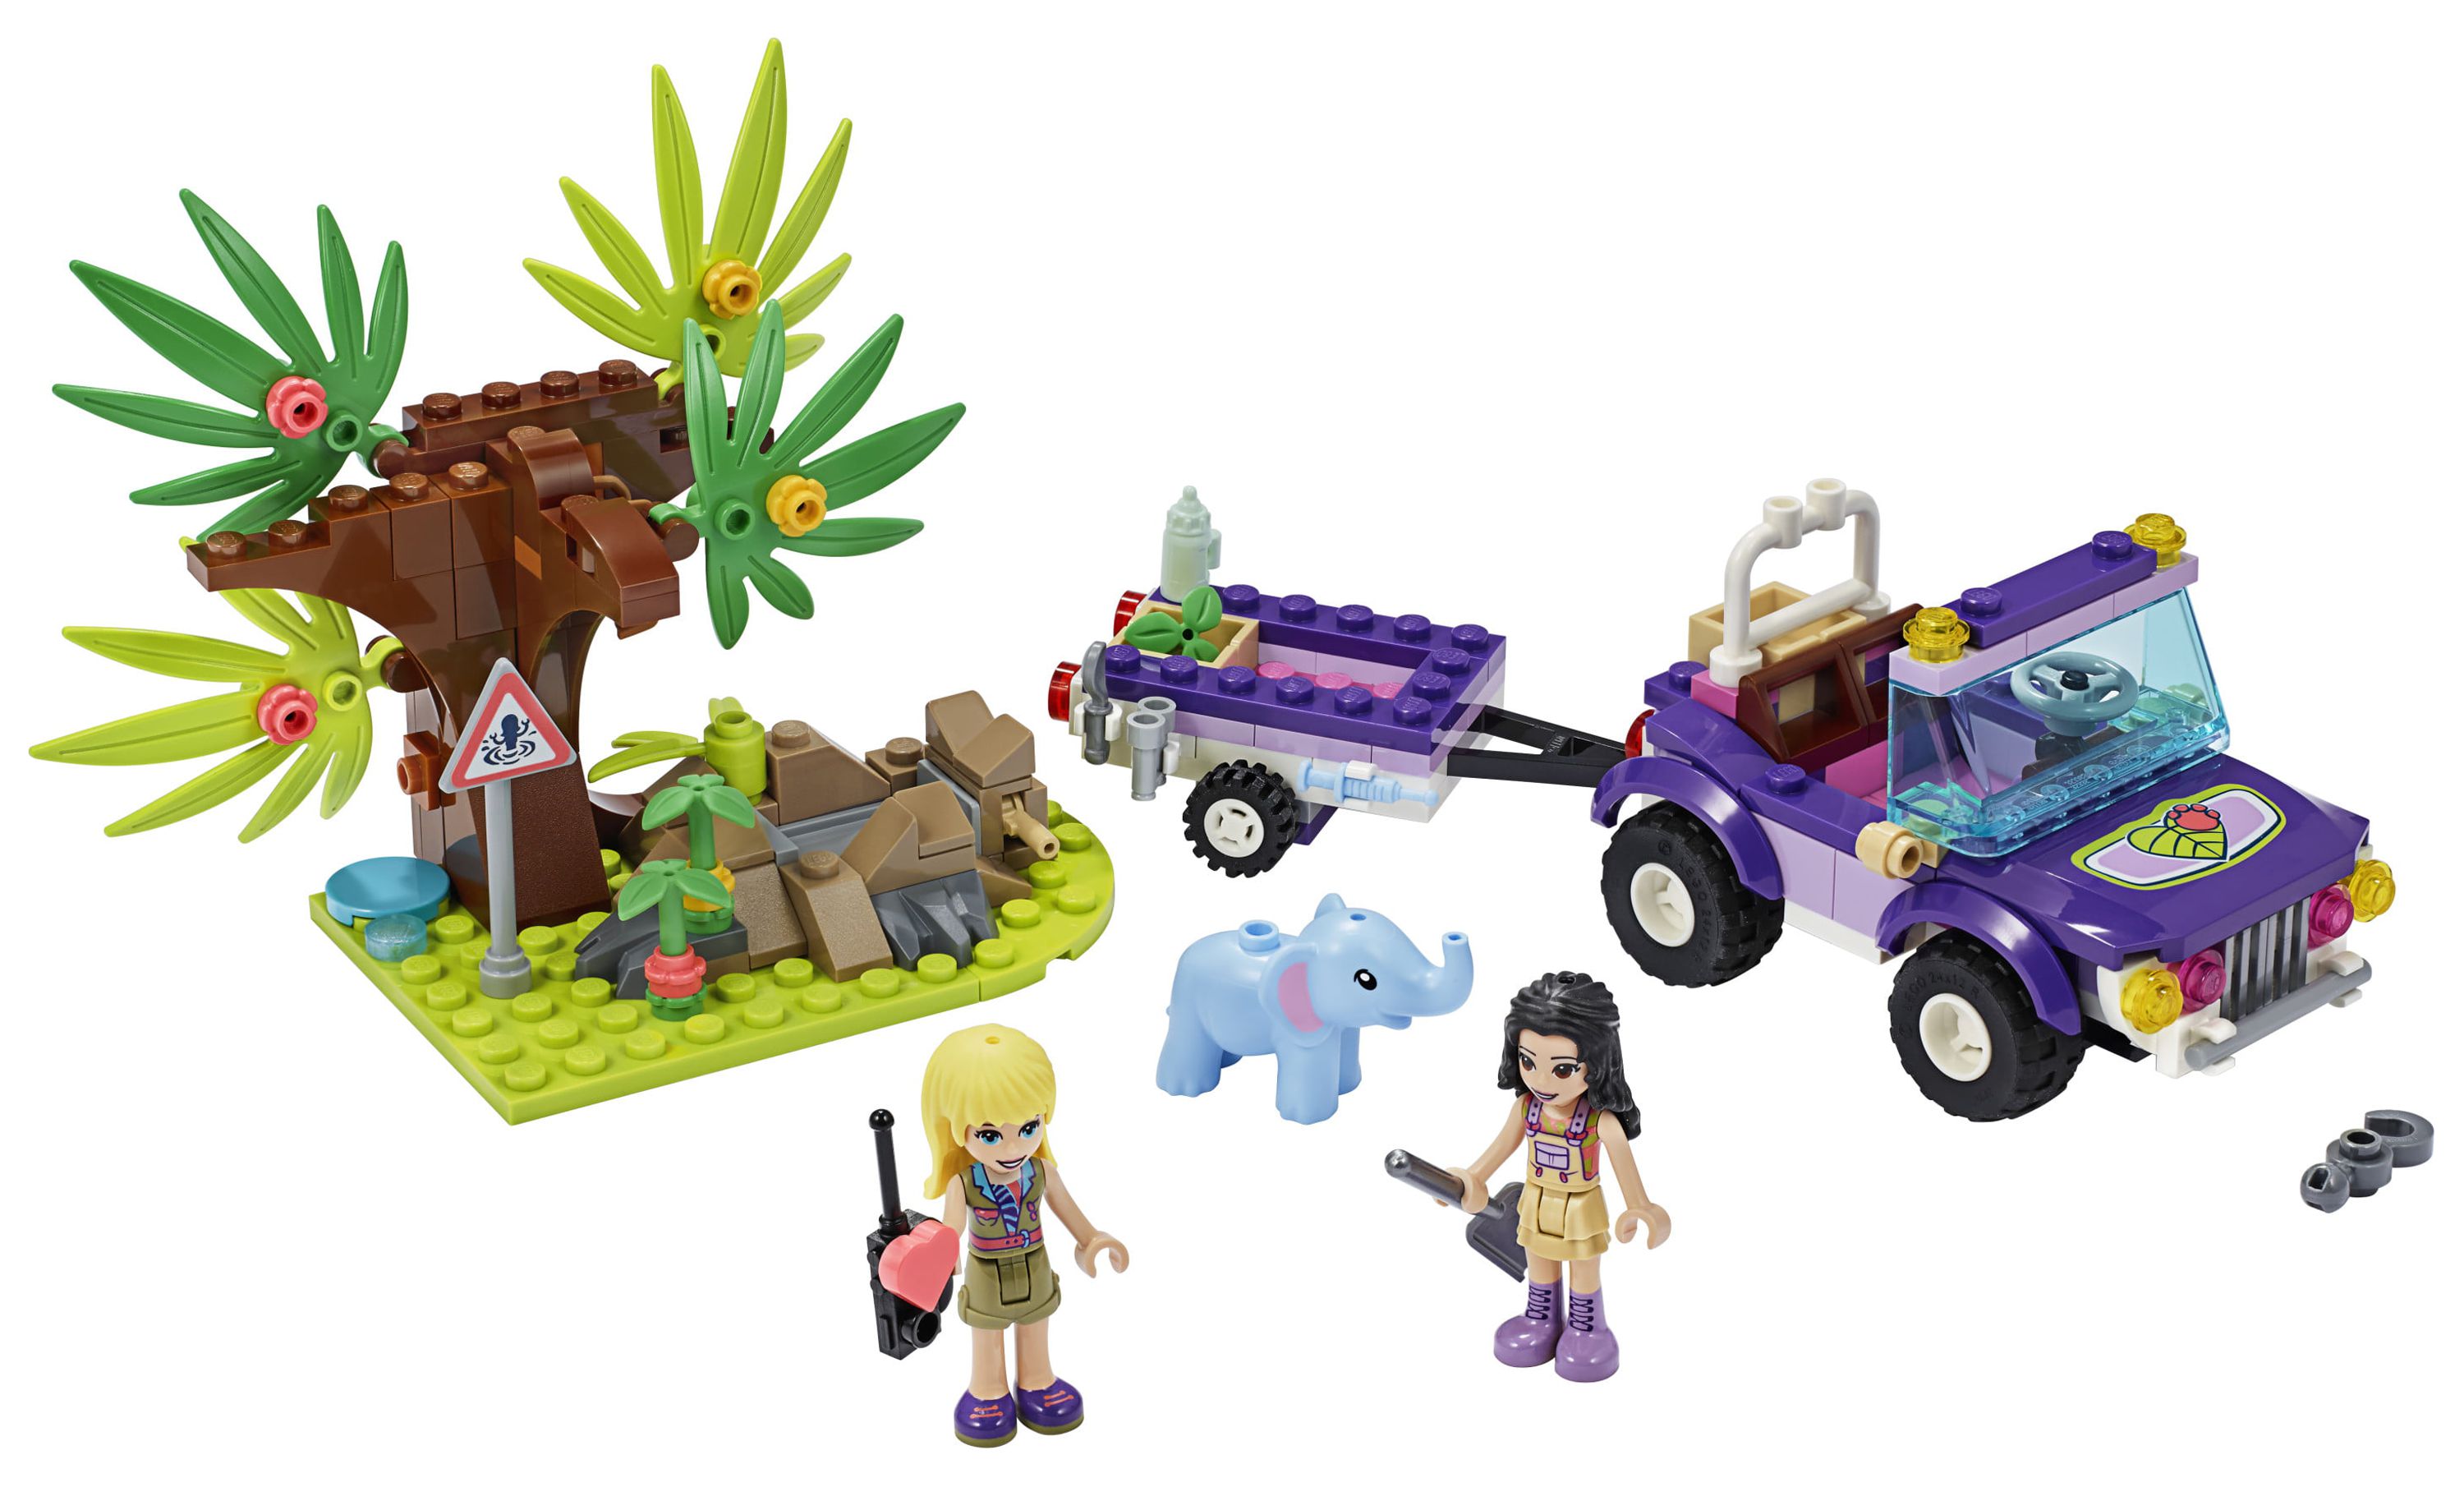 LEGO Friends Baby Elephant Jungle Rescue 41421 Building Toy for Kids; Jungle Rescue Fun Toy Promotes Creative Play (203 Pieces) - image 3 of 8